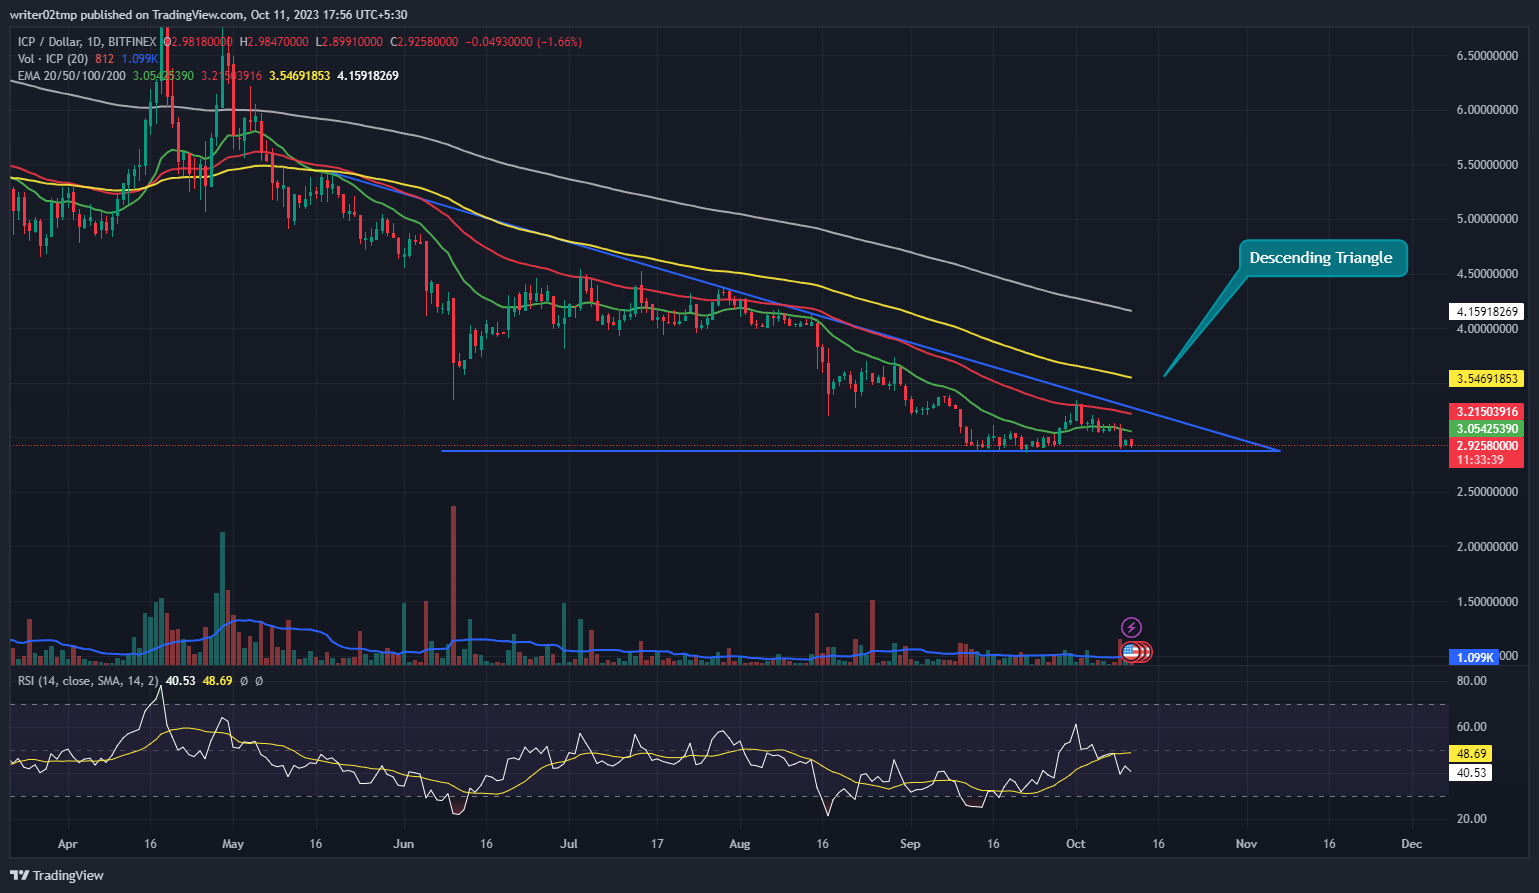 ICP Price Prediction: Will ICP Break Out of Declining Pattern?